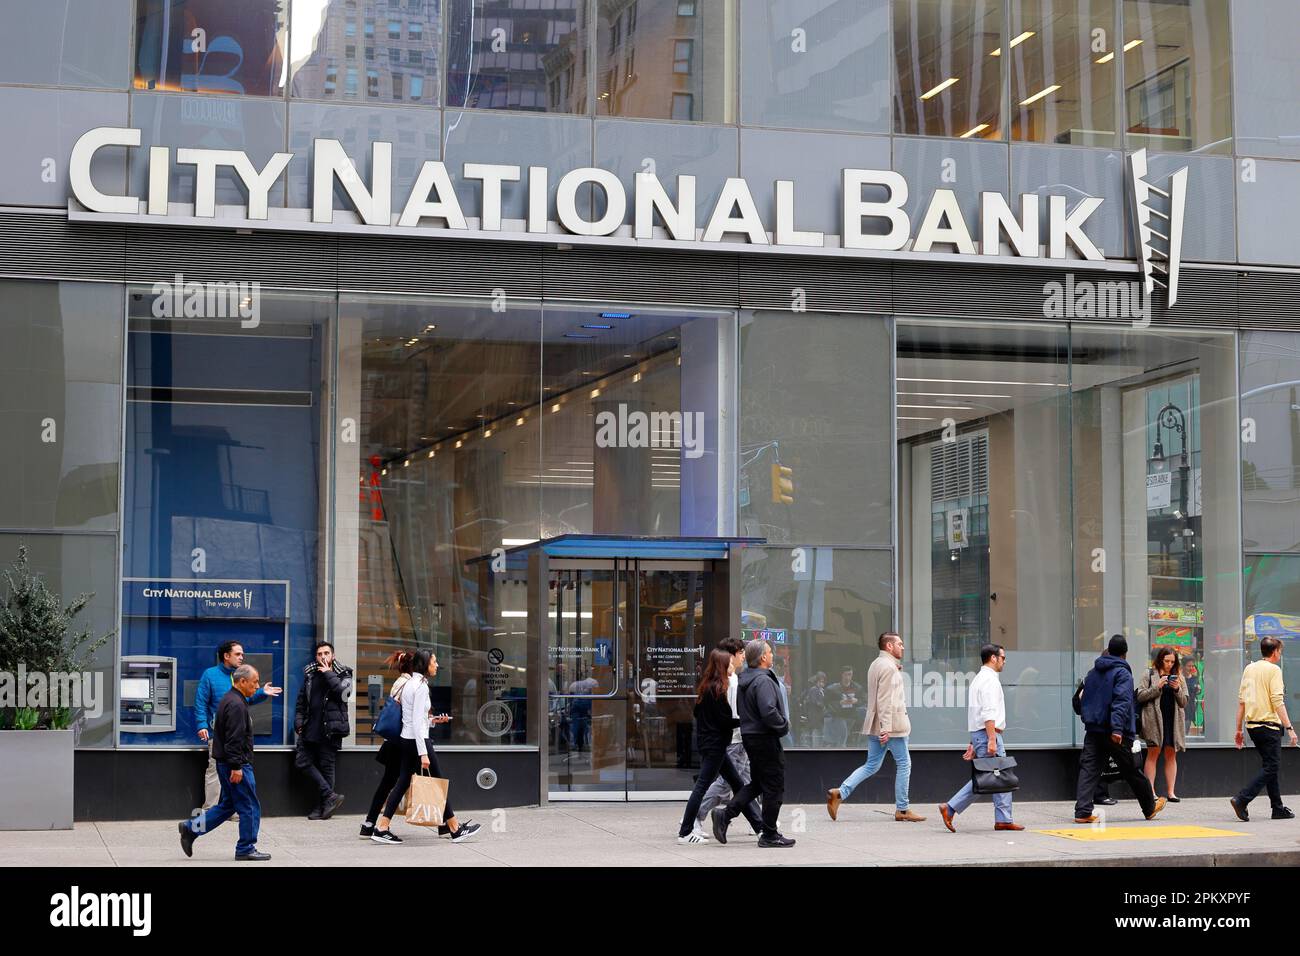 City National Bank, 1140 6th Ave, New York, NYC storefront photo of a bank in Midtown Manhattan. Stock Photo